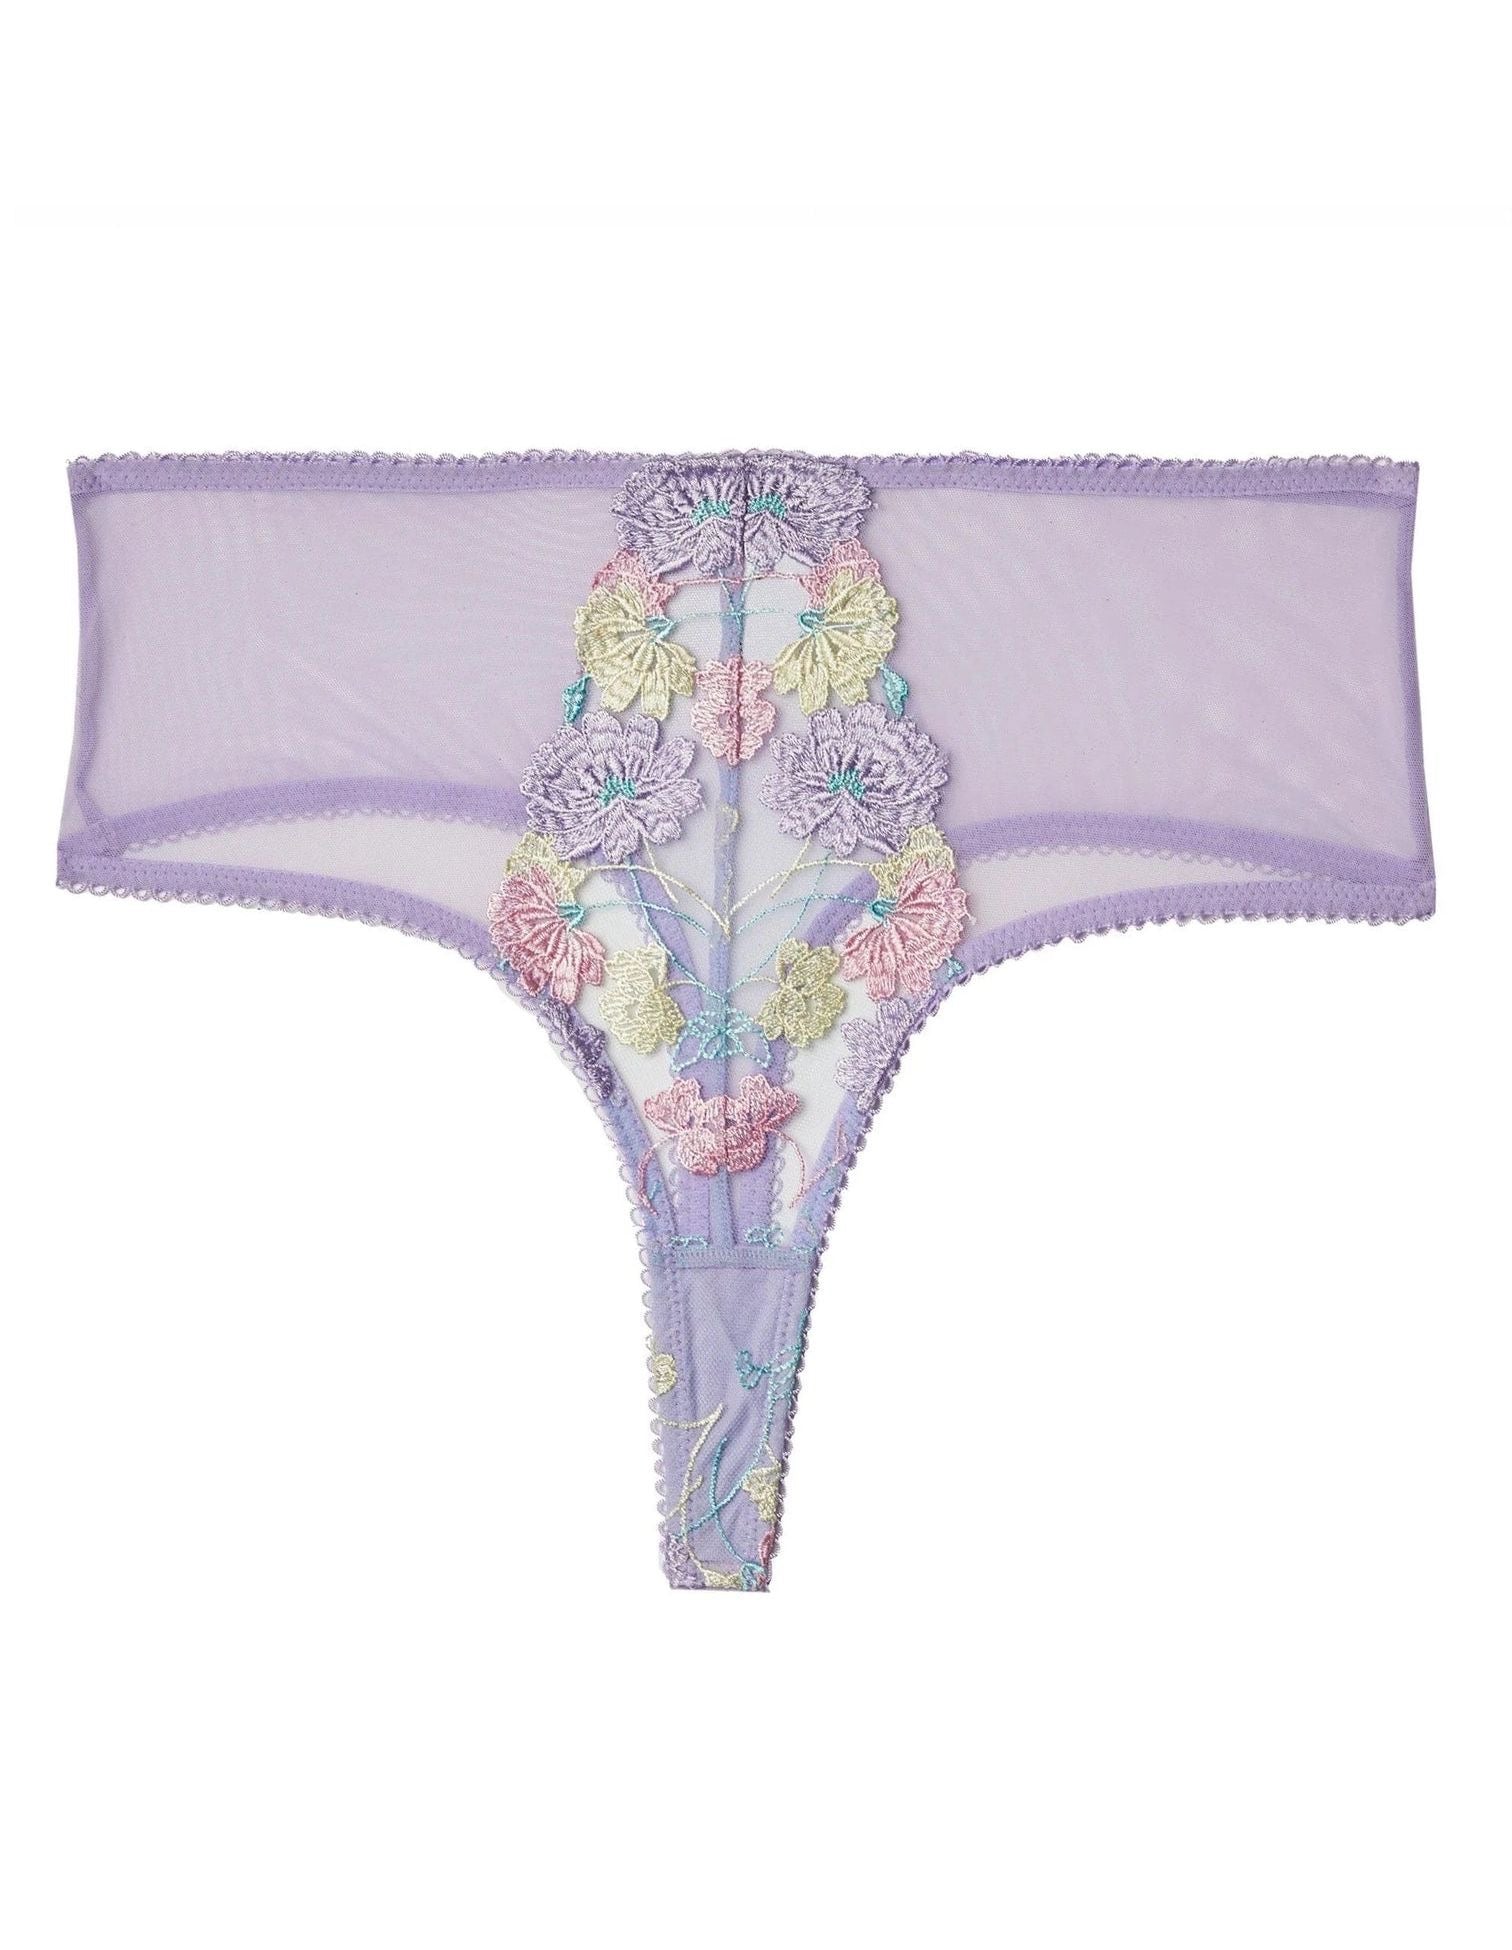 Luna Pastel Embroidered High Waist Thong - Last chance to buy! (UK 12)